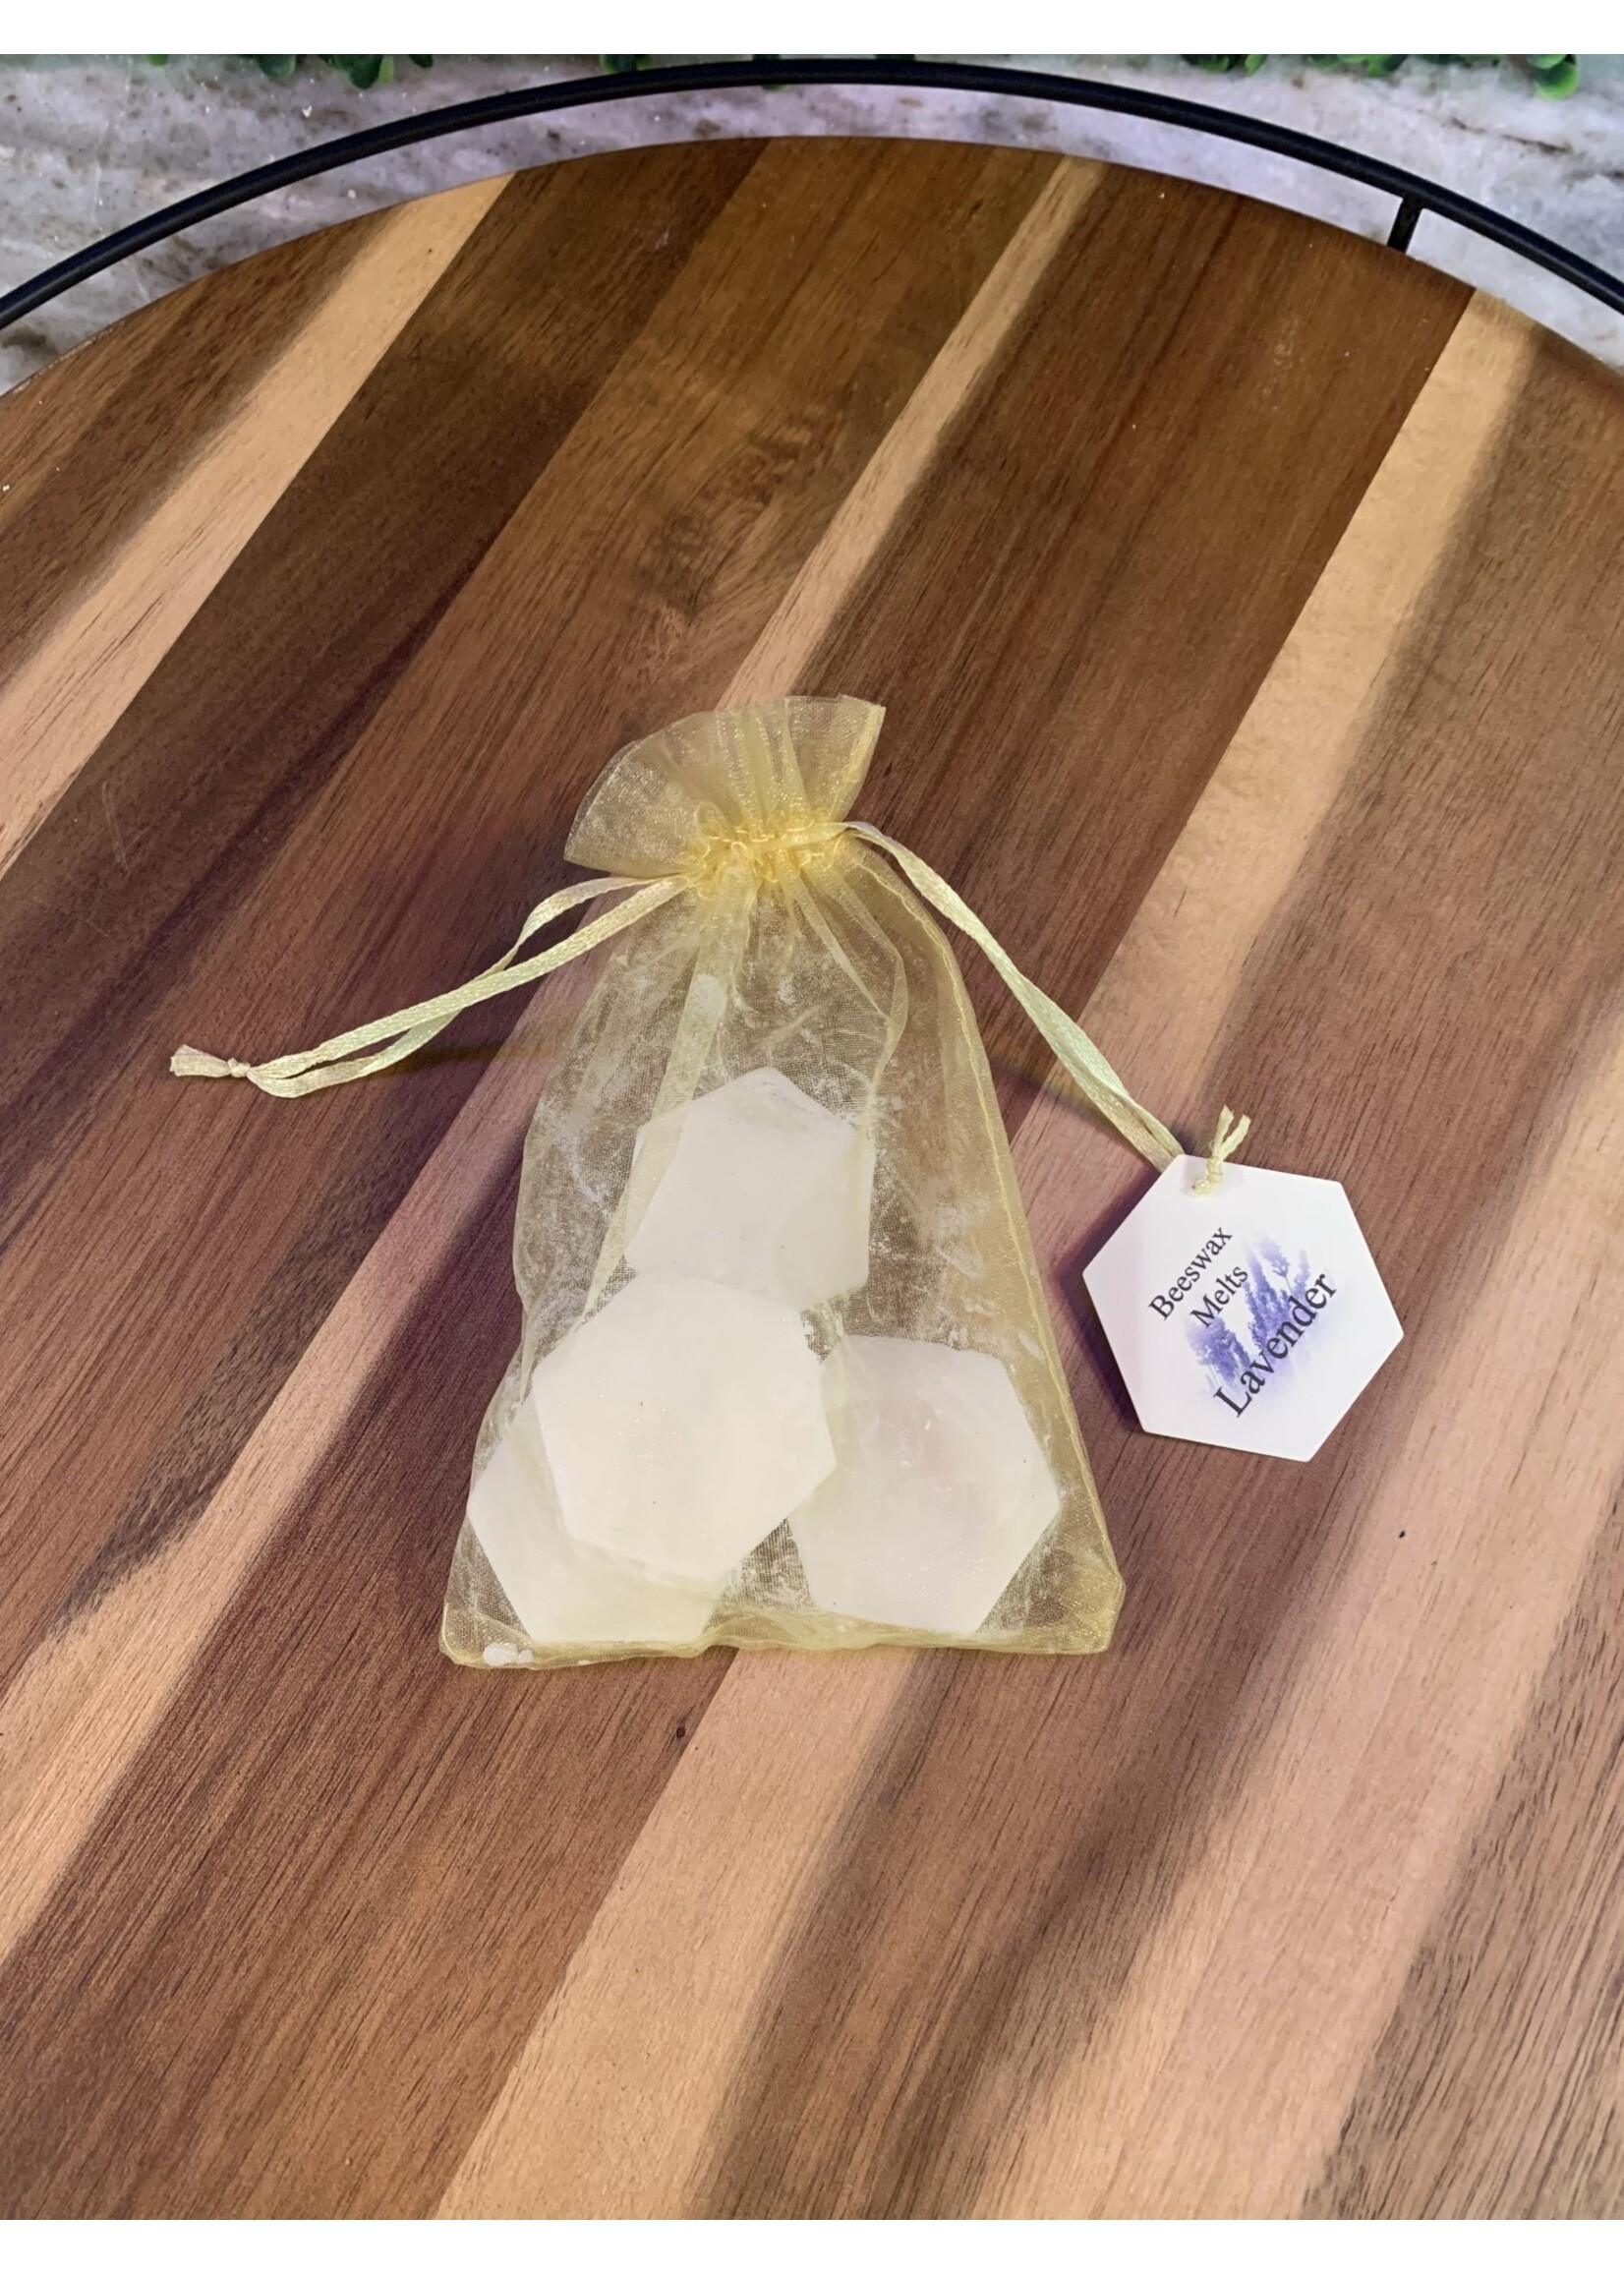 T's Bees Beeswax Melts - 4 Pack